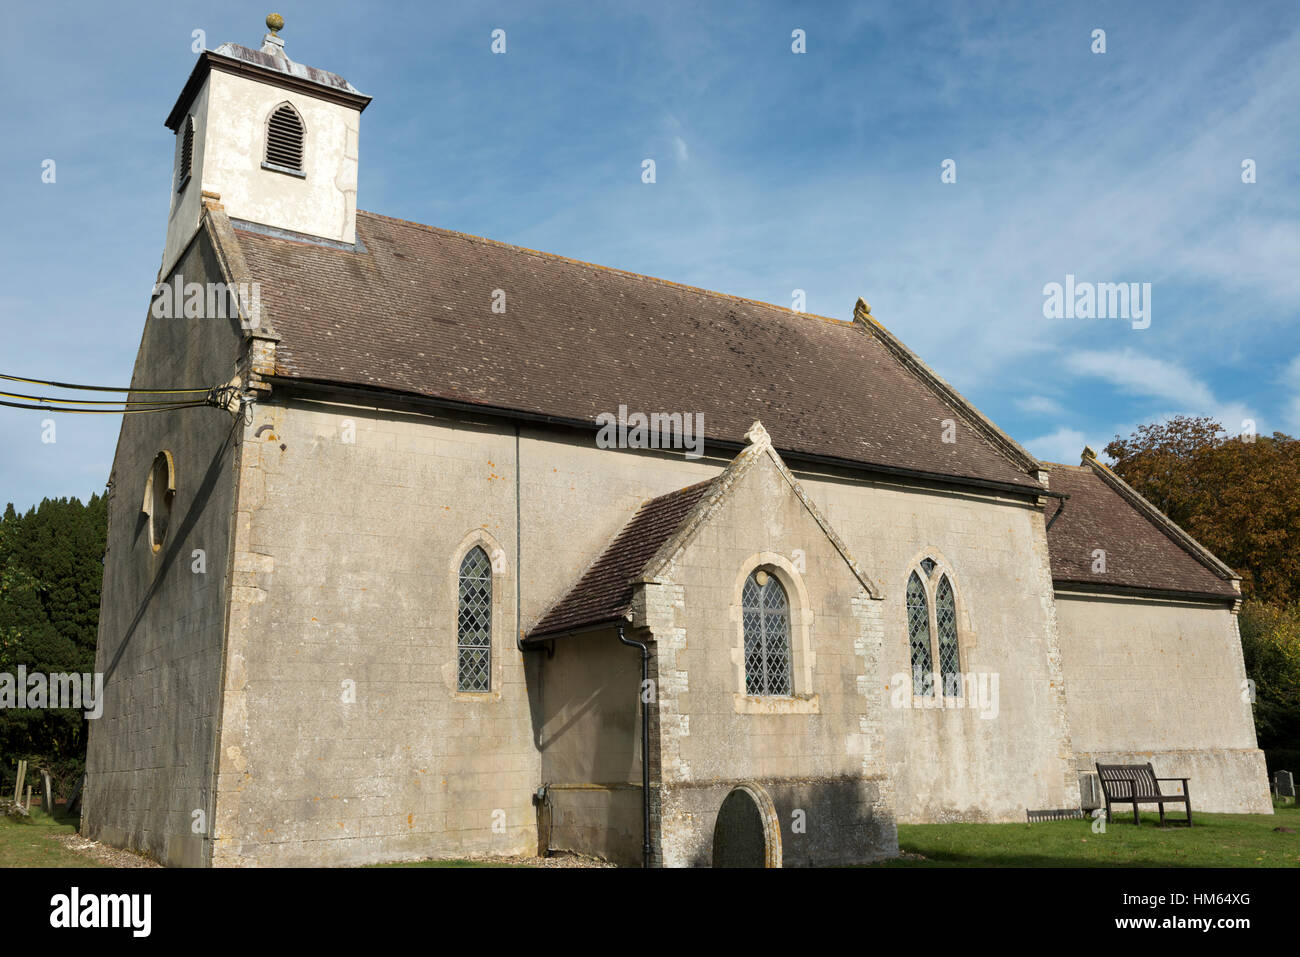 Church of King Charles the Martyr, Shelland, Suffolk, England. Stock Photo